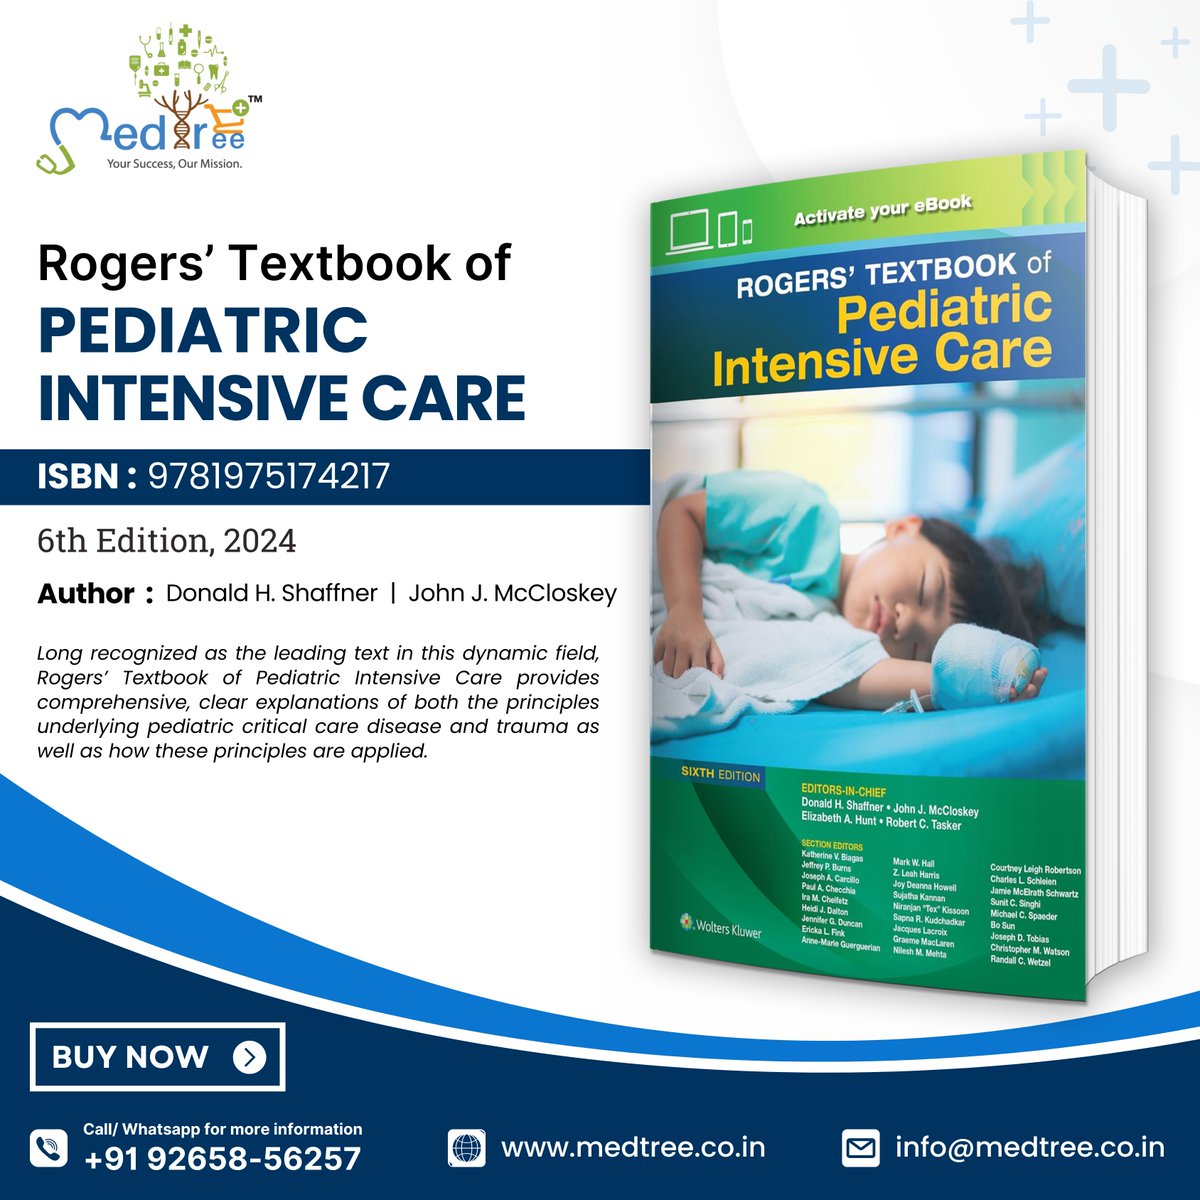 Rogers’ Textbook of Pediatric Intensive Care
Buy Now: medtree.co.in/product/rogers…

#pediatricintensivecare #wolterkluwer #rogerstextbook #PediatricBook #PediatricCare #medicalbook #MedicalBooks #medicalstudent #onlinemedicalbook #MedTree #medtreeindia